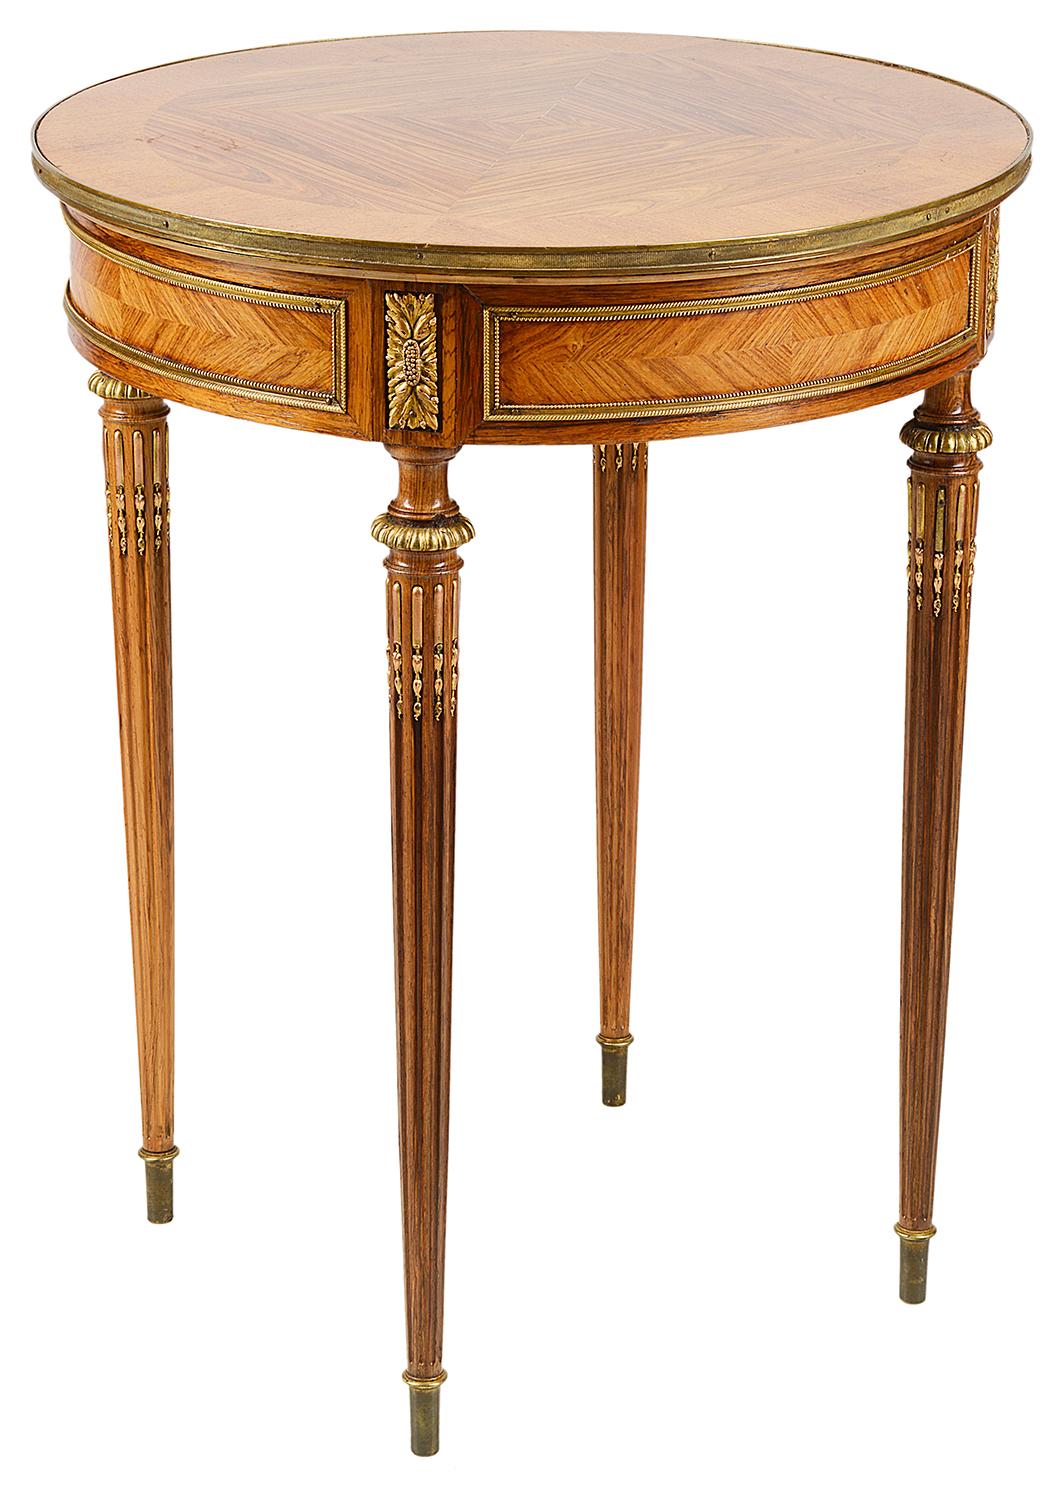 A good quality late 19th century Kingwood veneered circular side table or gueridon. Having a quartered veneered top with crossbanding, ormolu mounts to the panelled frieze, raised on turned tapering stop fluted legs.